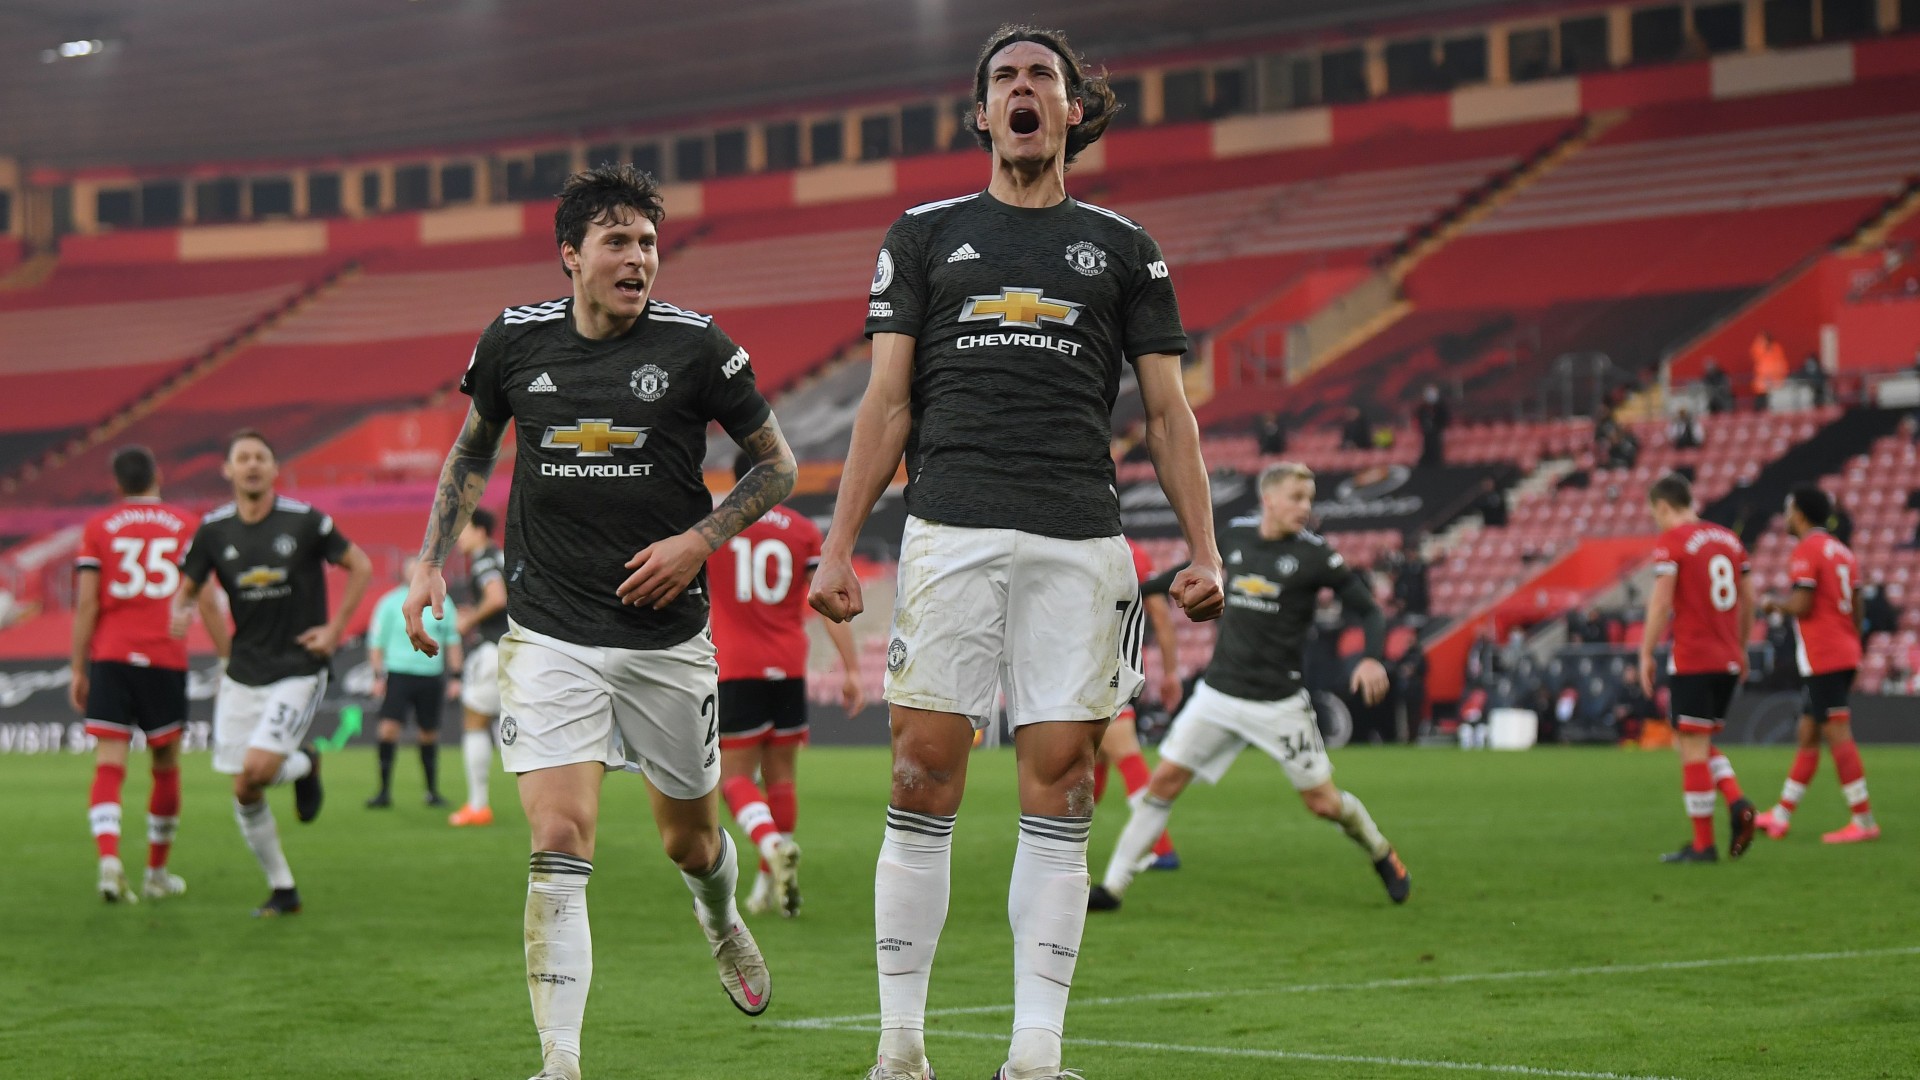 Man Utd set new club record for away wins after thrilling comeback to beat Southampton | Goal.com